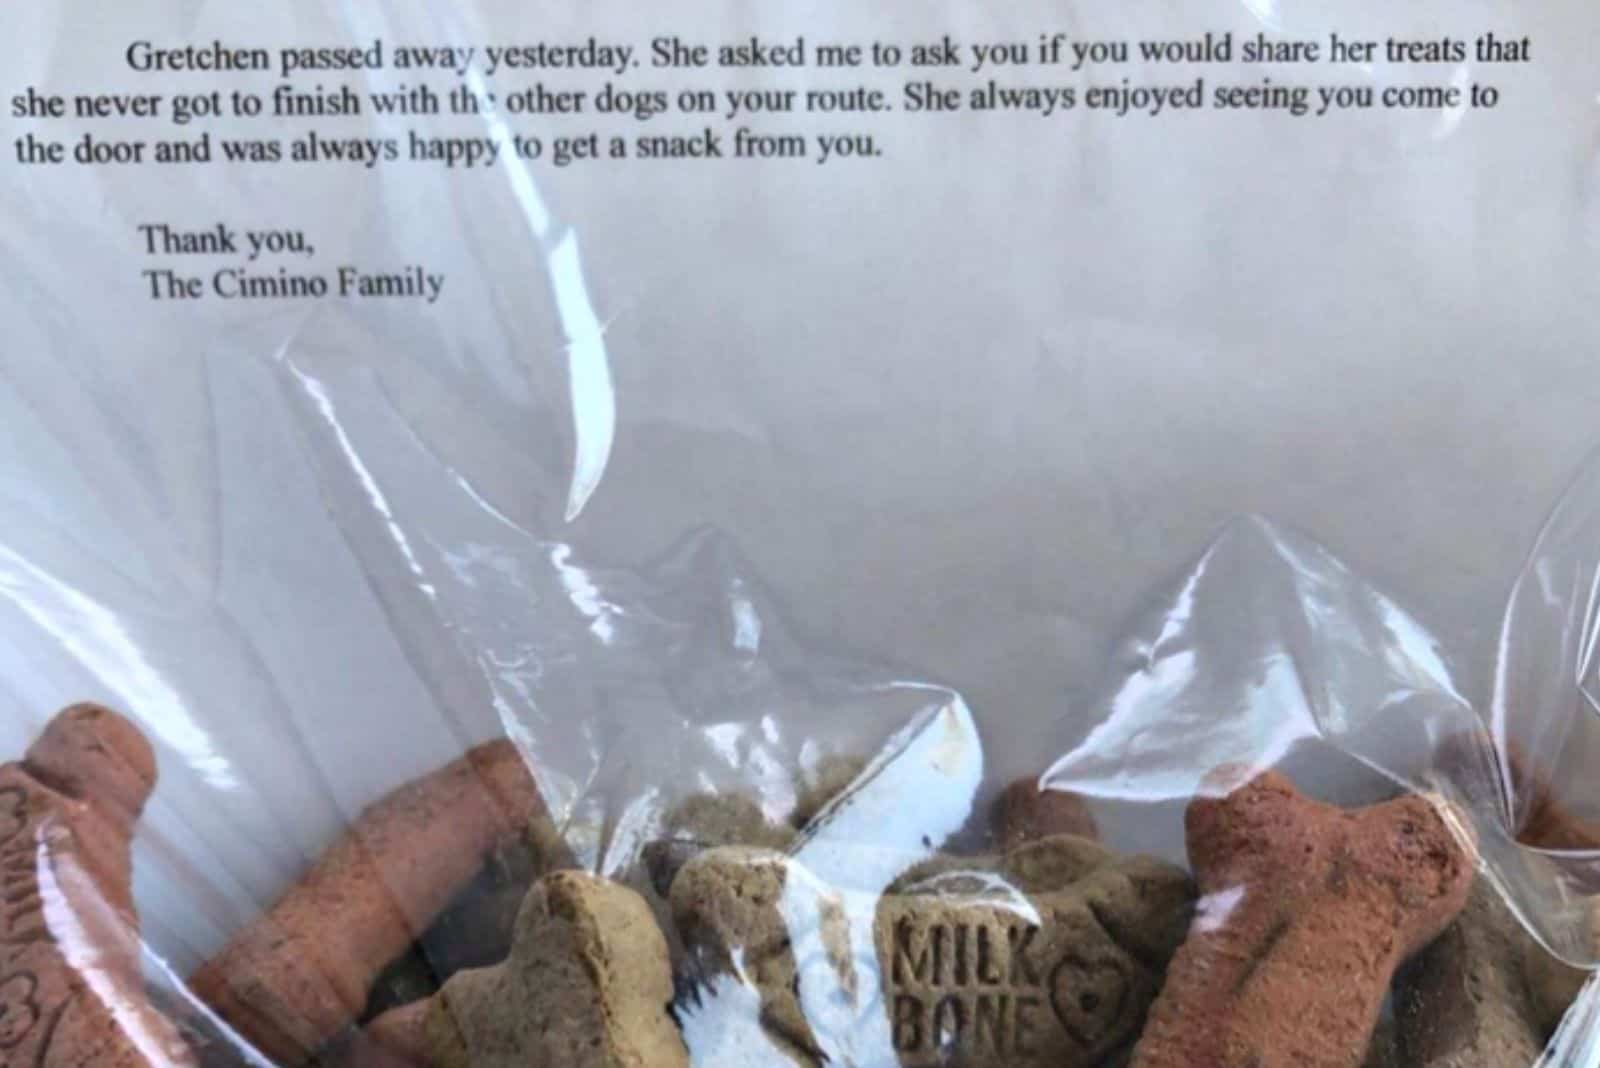 a letter with dog treats